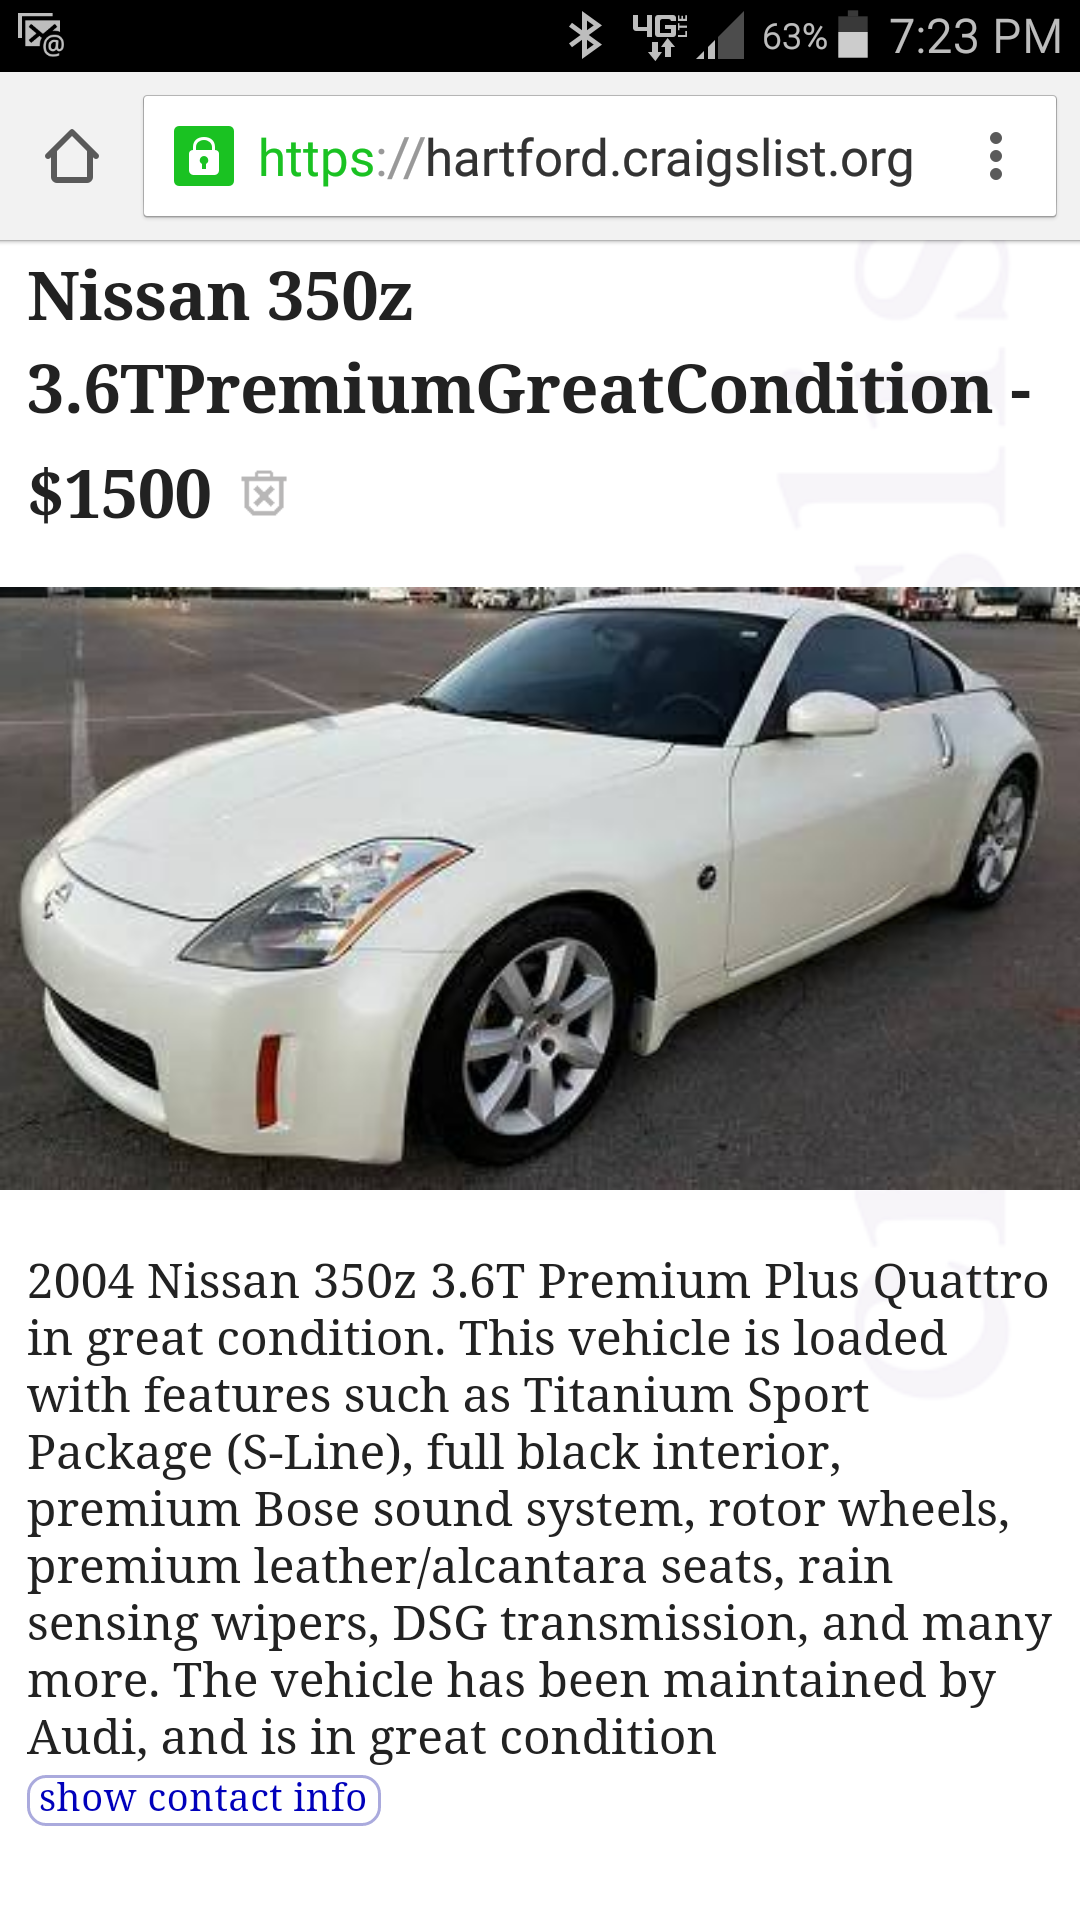 Can we have a Craigslist "Z Funnies" thread? - MY350Z.COM ...